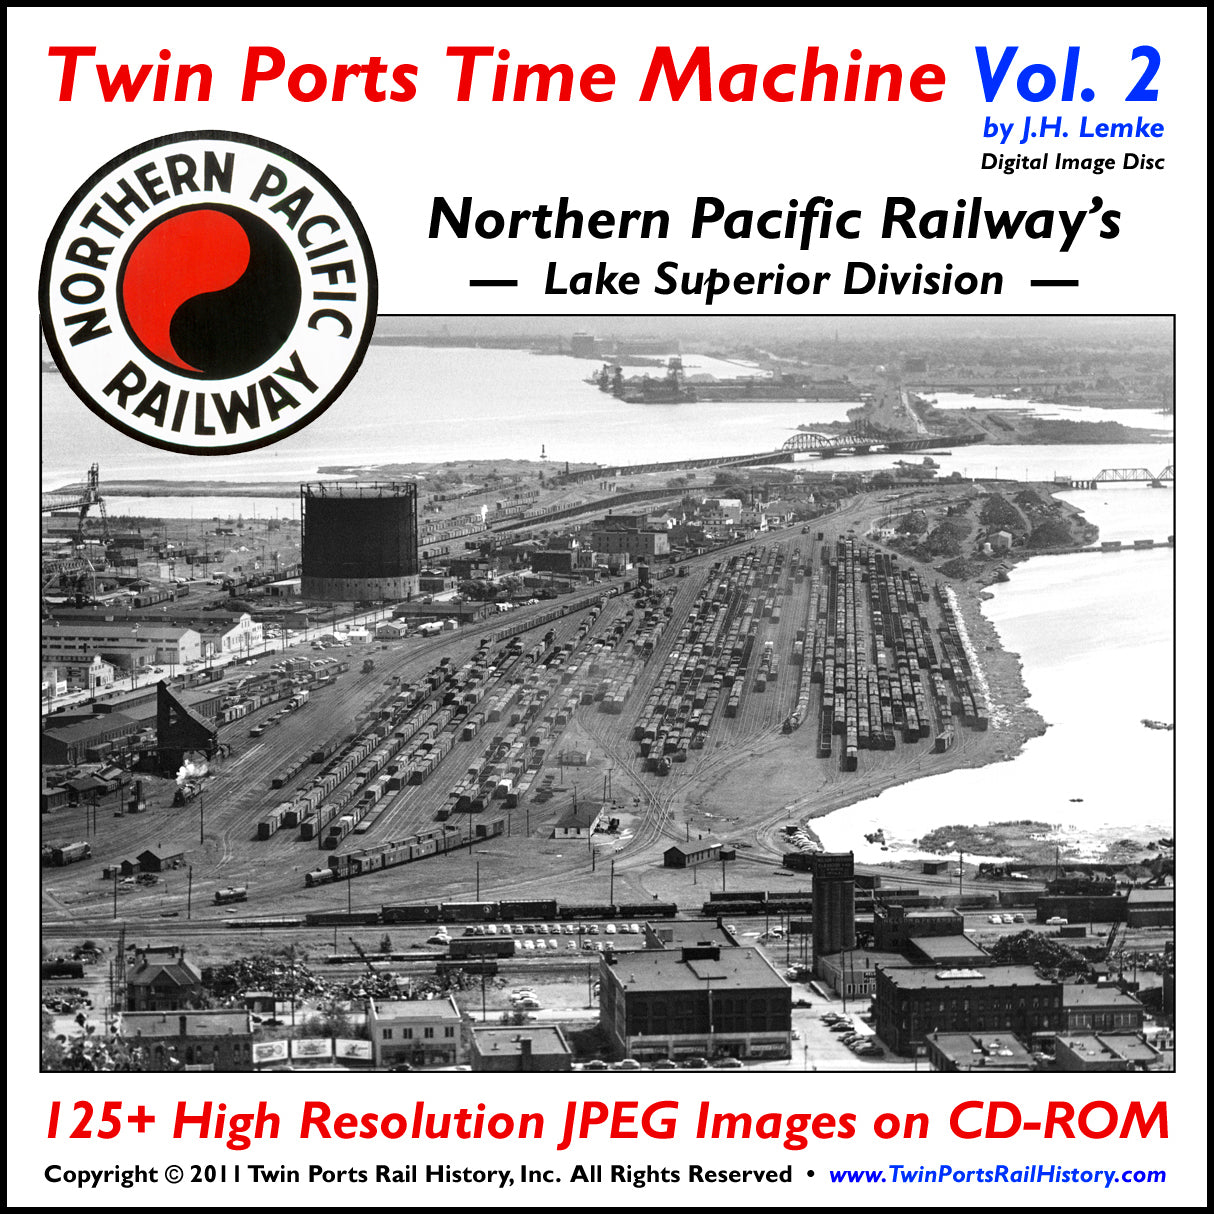 Northern Pacific Railway's Lake Superior Division Twin Ports Time Machine Vol. 2 CD-ROM Digital Image Disc